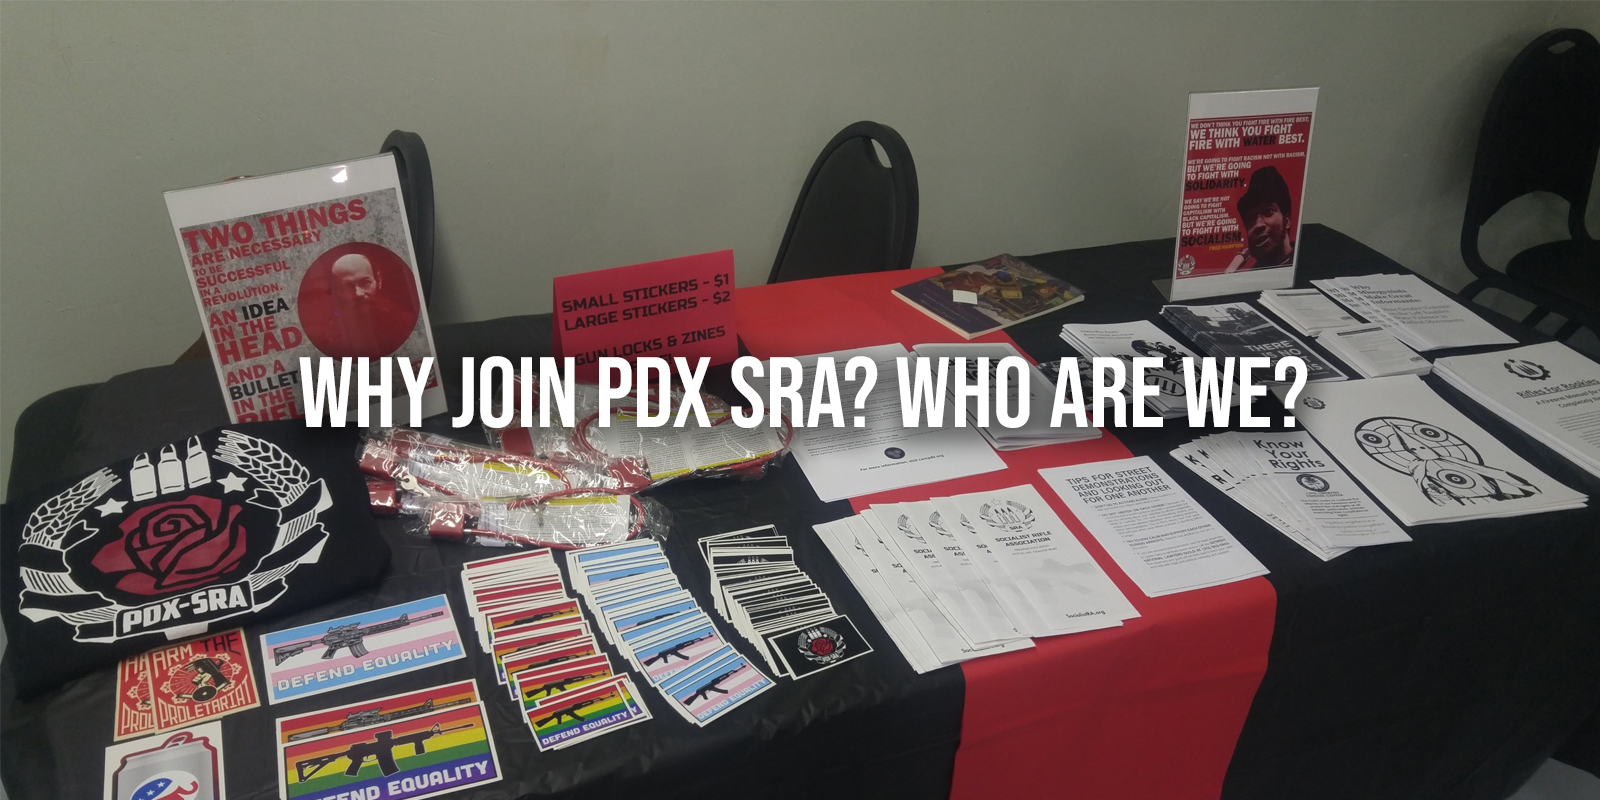 Photo of PDX-SRA tabling at an event